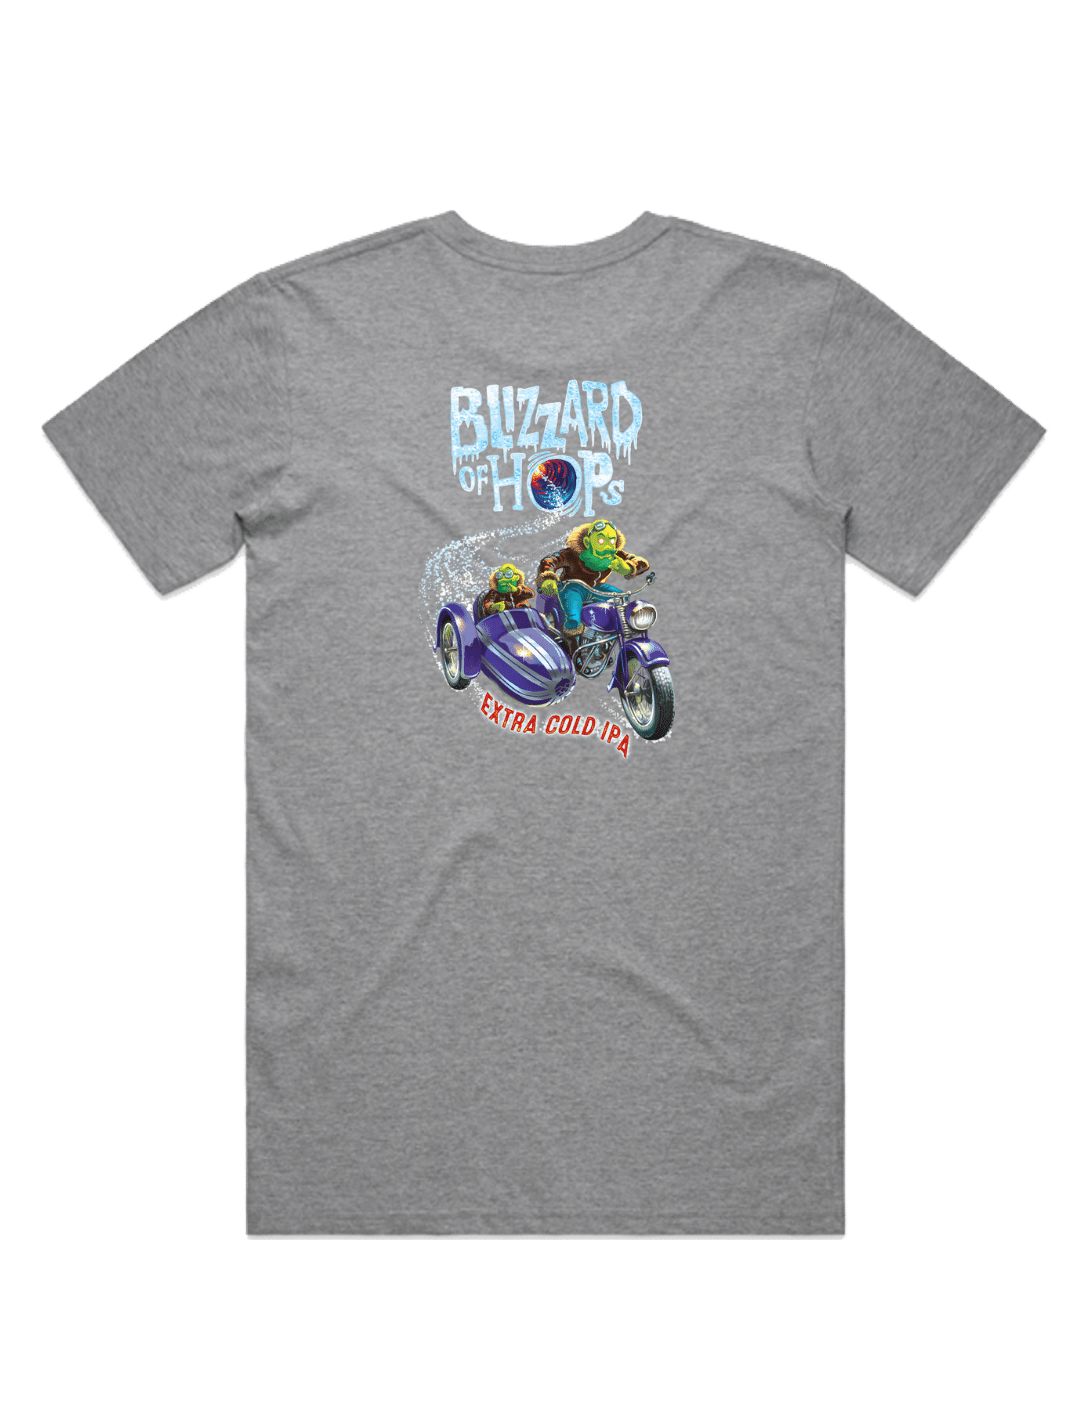 Bach Brewing Mens T-shirt - Blizzard of Hops (back graphic)